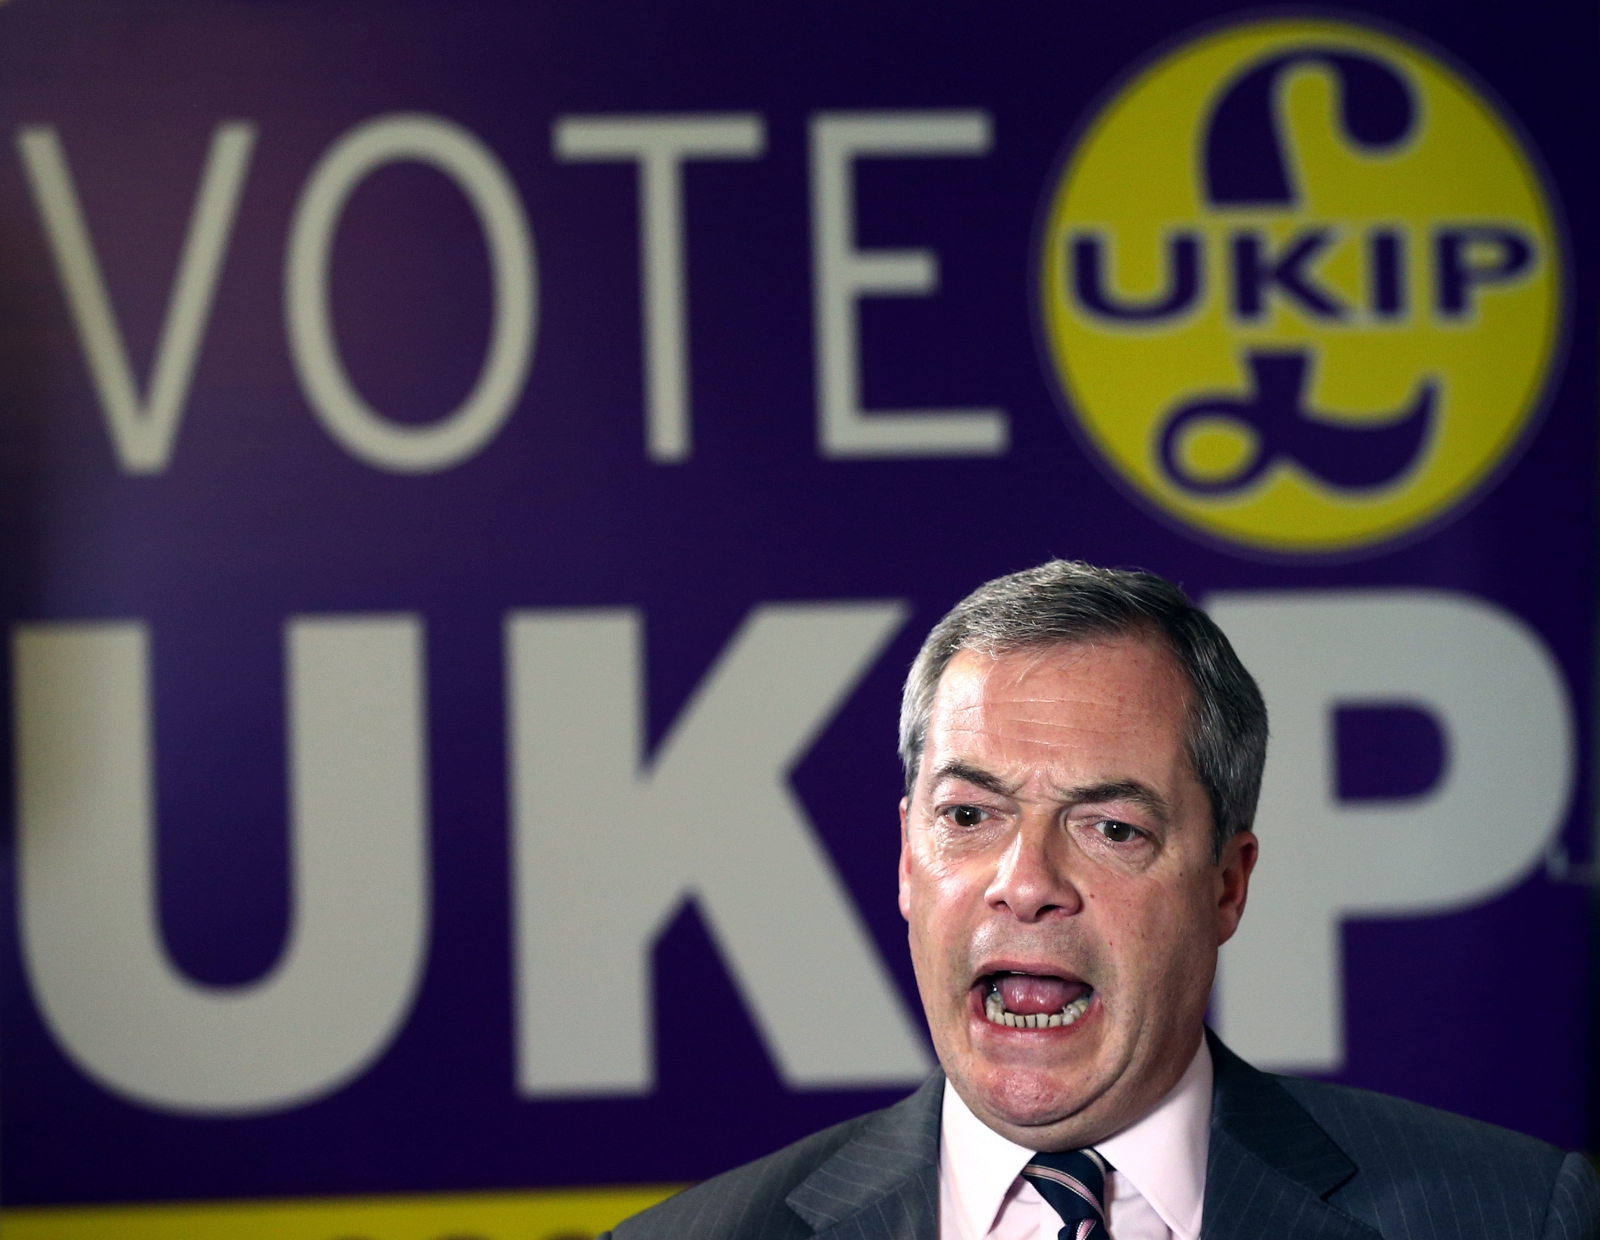 Nigel Farage suggest Muslim voices are responsible for rising anti-semitism in Britain